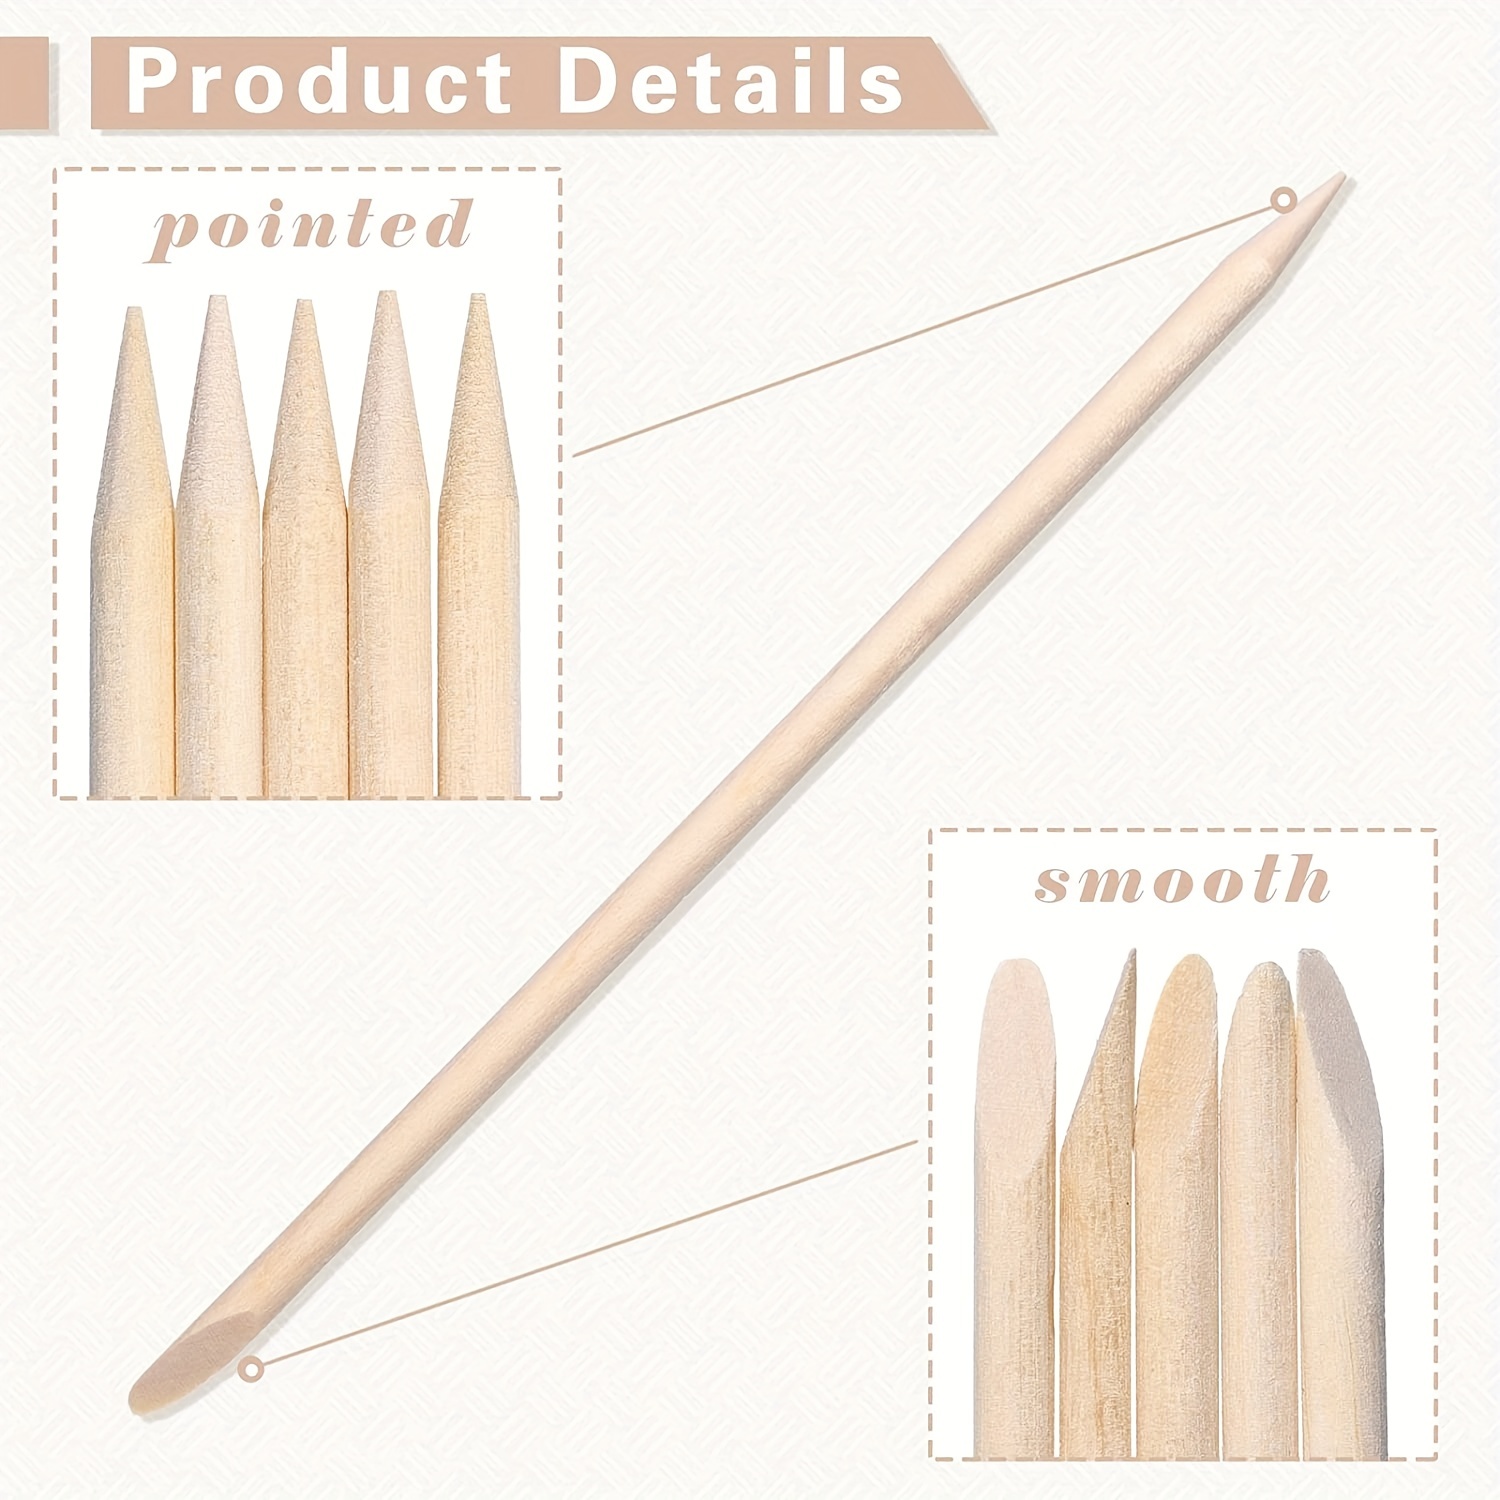 Wooden Wax Sticks - Eyebrow, Lip, Nose Small Waxing Applicator Sticks for  Hair Removal and Smooth Skin - Spa and Home Usage 200.